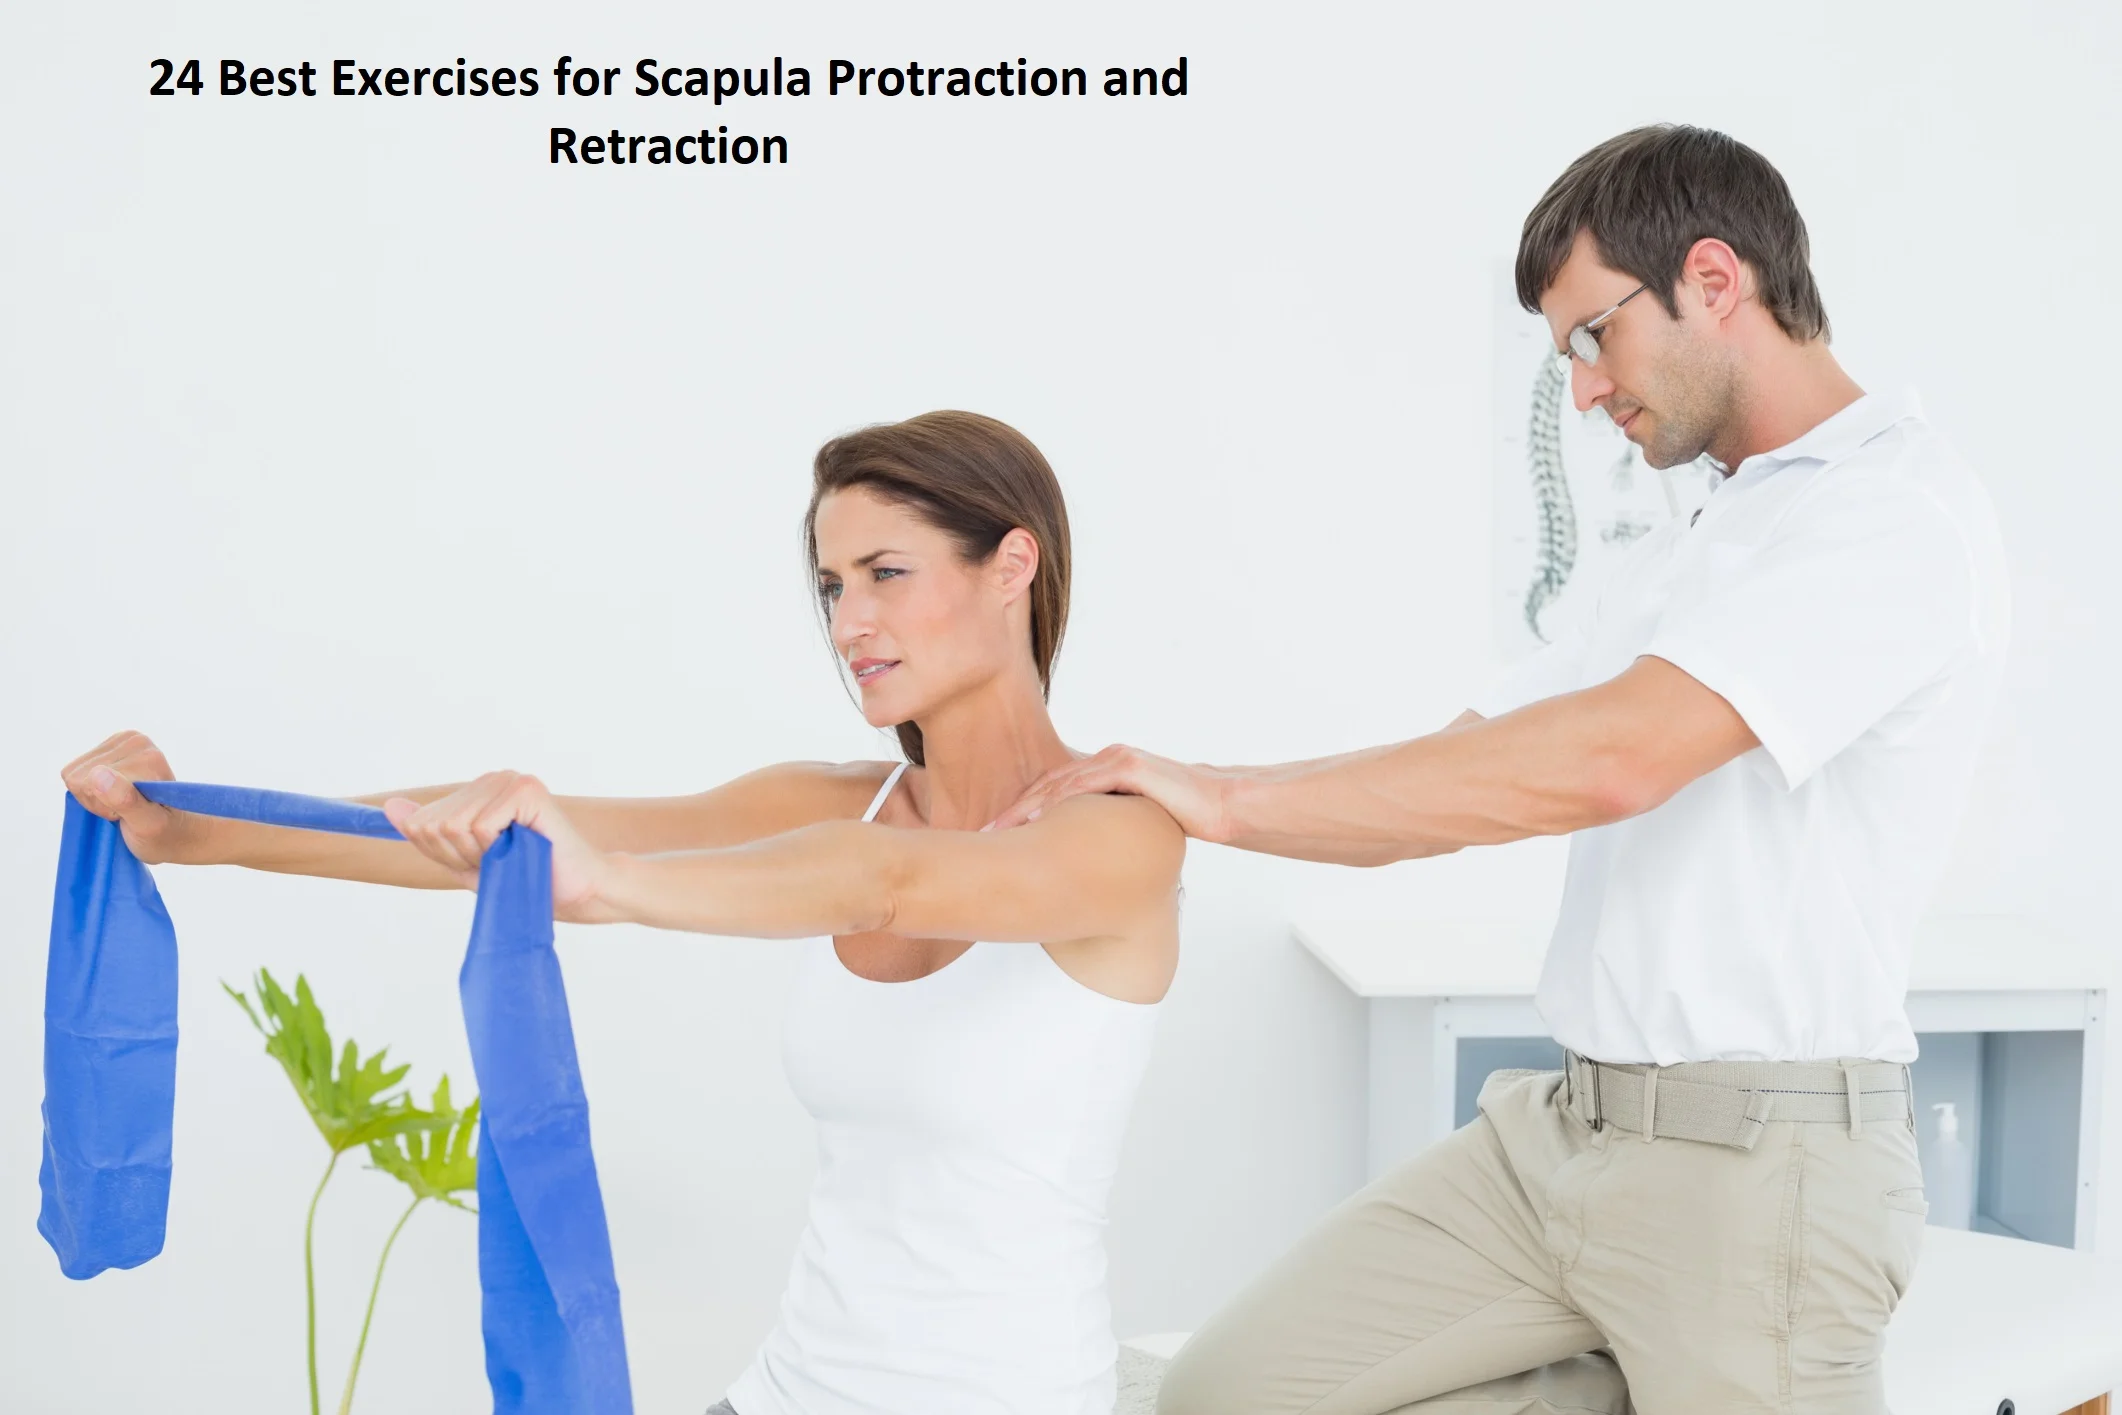 Exercises for Scapula Protraction and Retraction